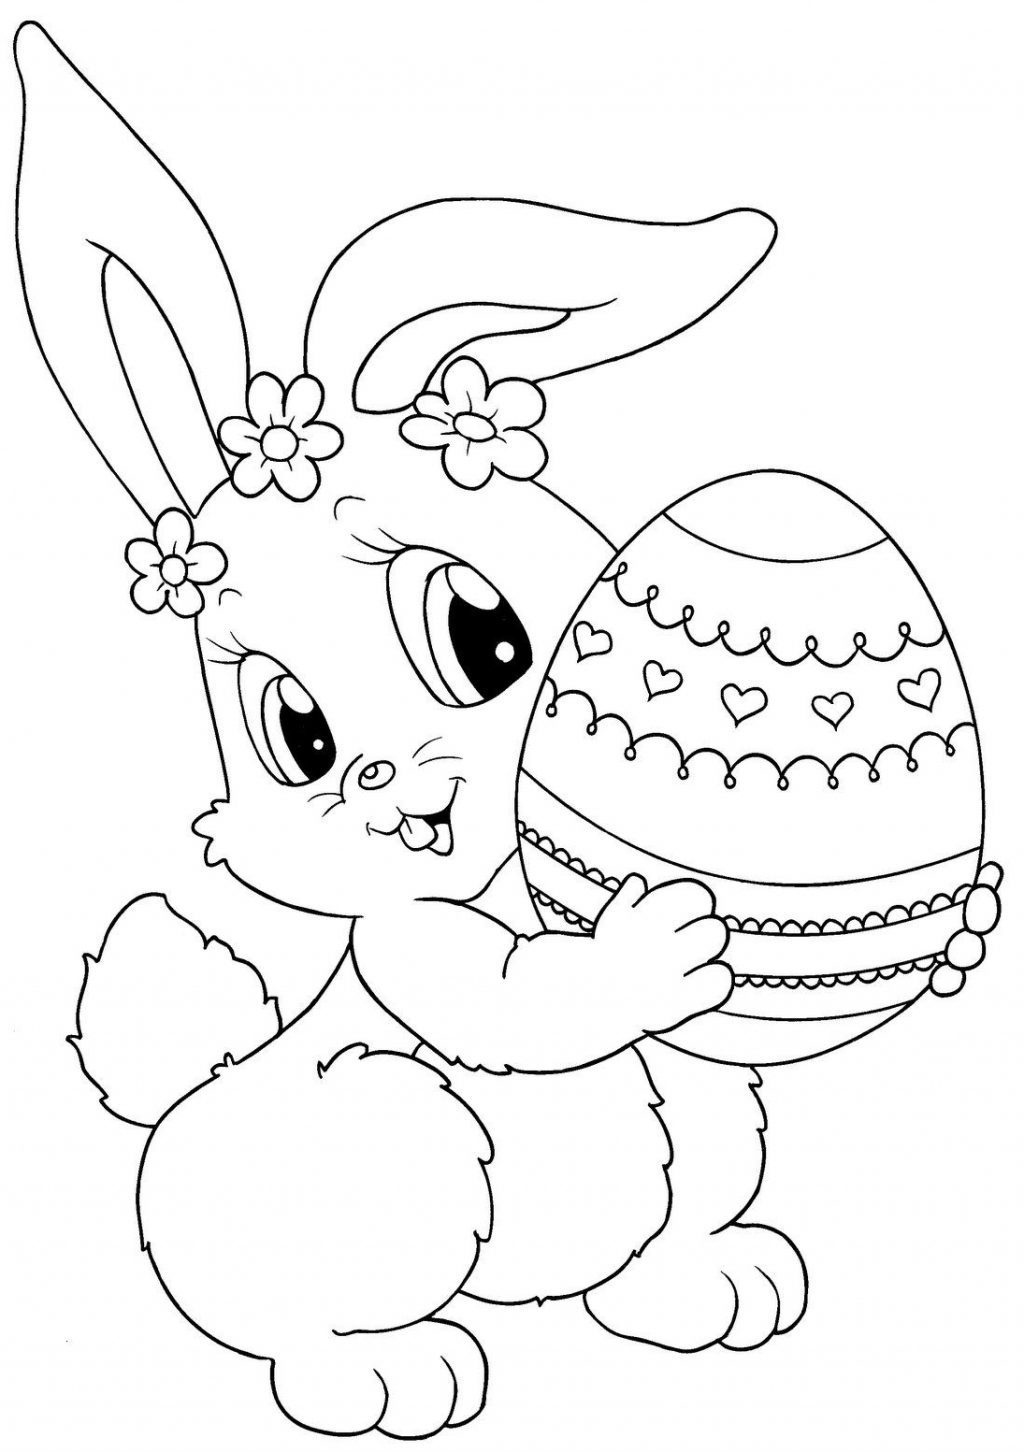 Coloring Page ~ Free Printable Easter Coloringes Extraordinary - Coloring Pages Free Printable Easter